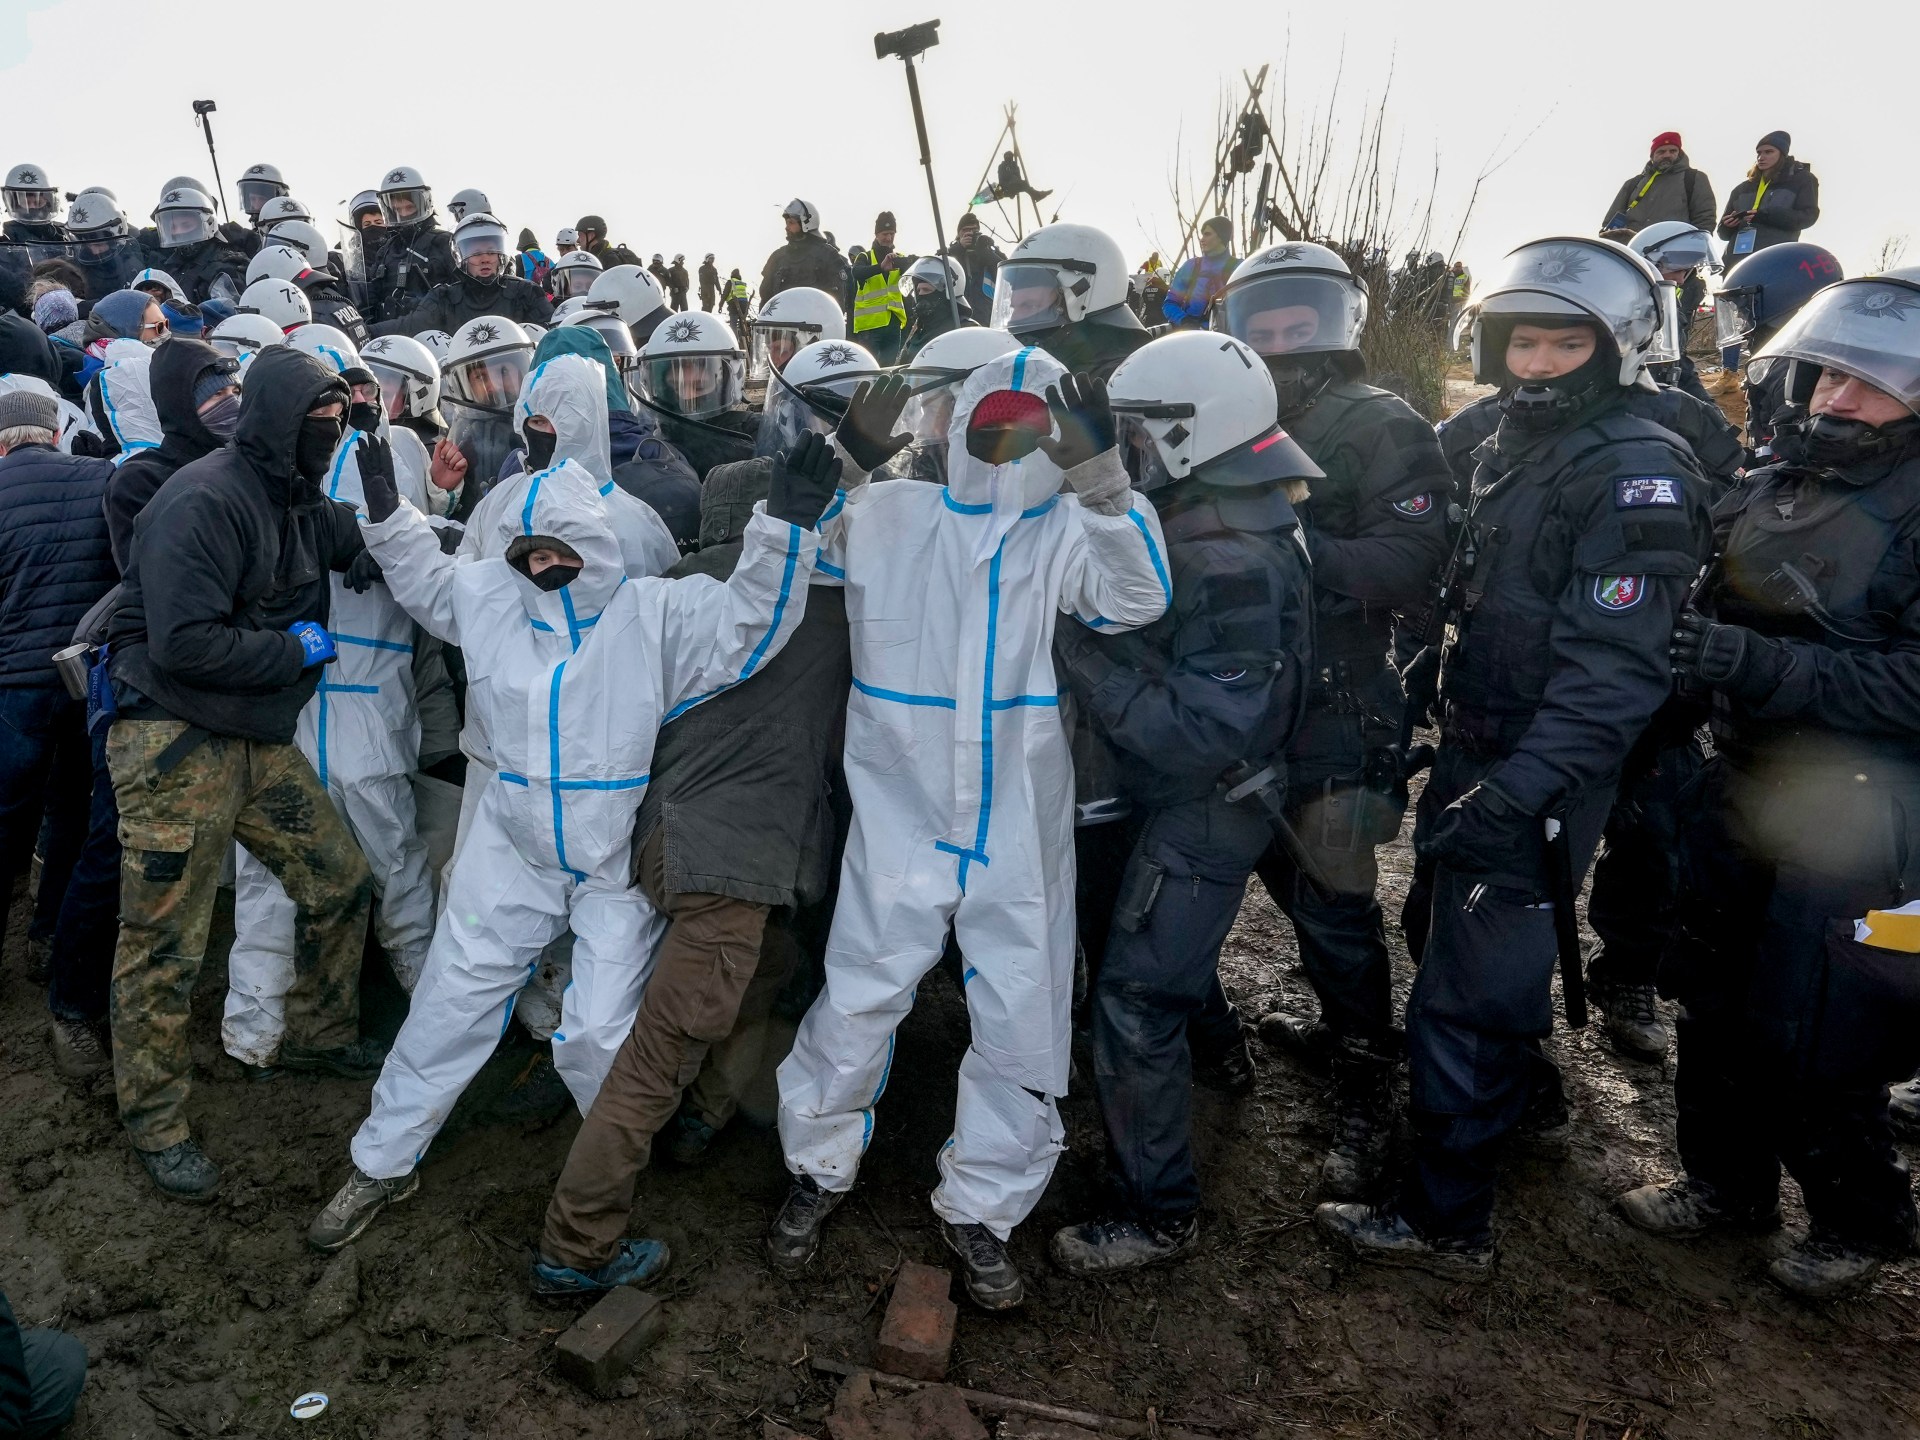 Photos: Police begin clearing coal mine protest camp in Germany